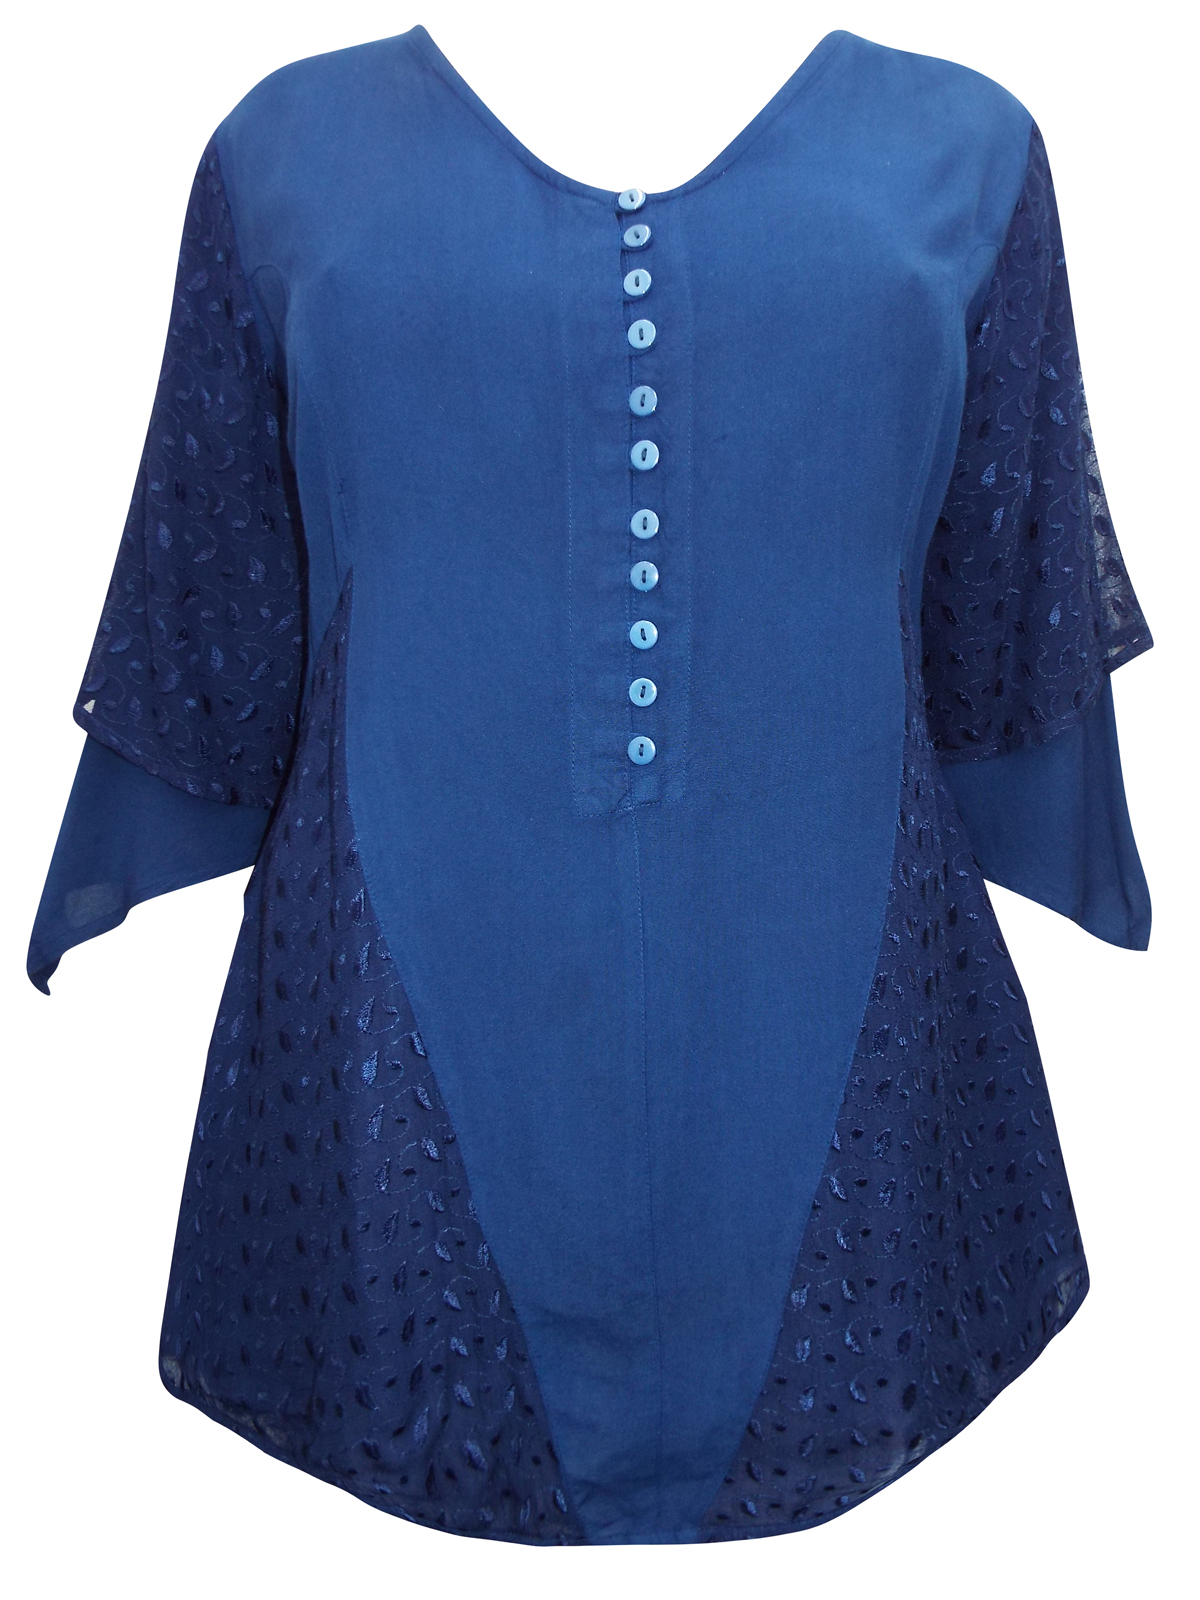 eaonplus DENIM-BLUE Broderie Anglaise Rayon Tunic Top - Plus Size 20 to 34